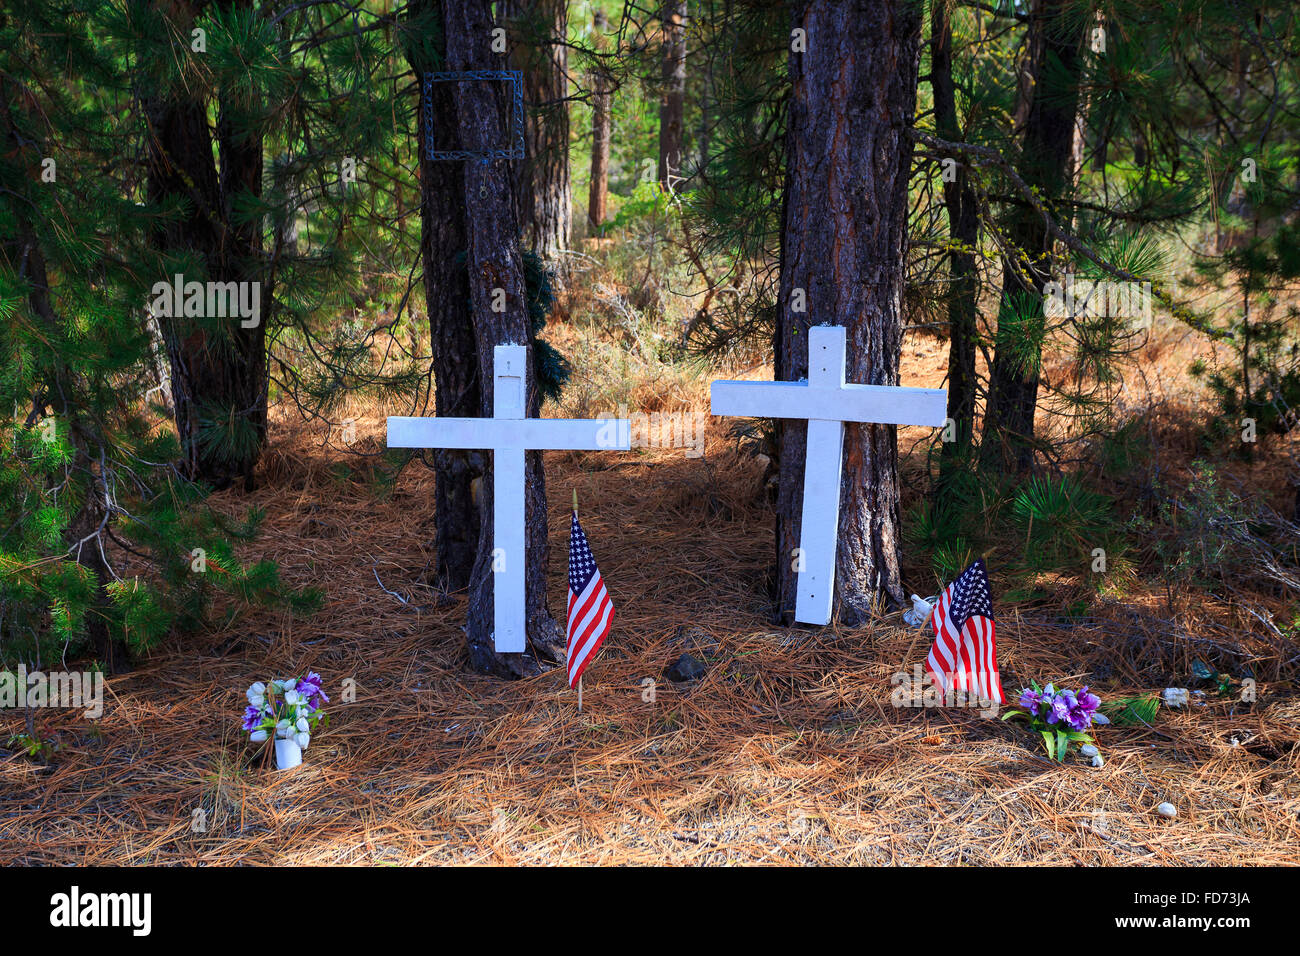 White crosses show where two people have died in a traffic accident on the highway years ago. Stock Photo